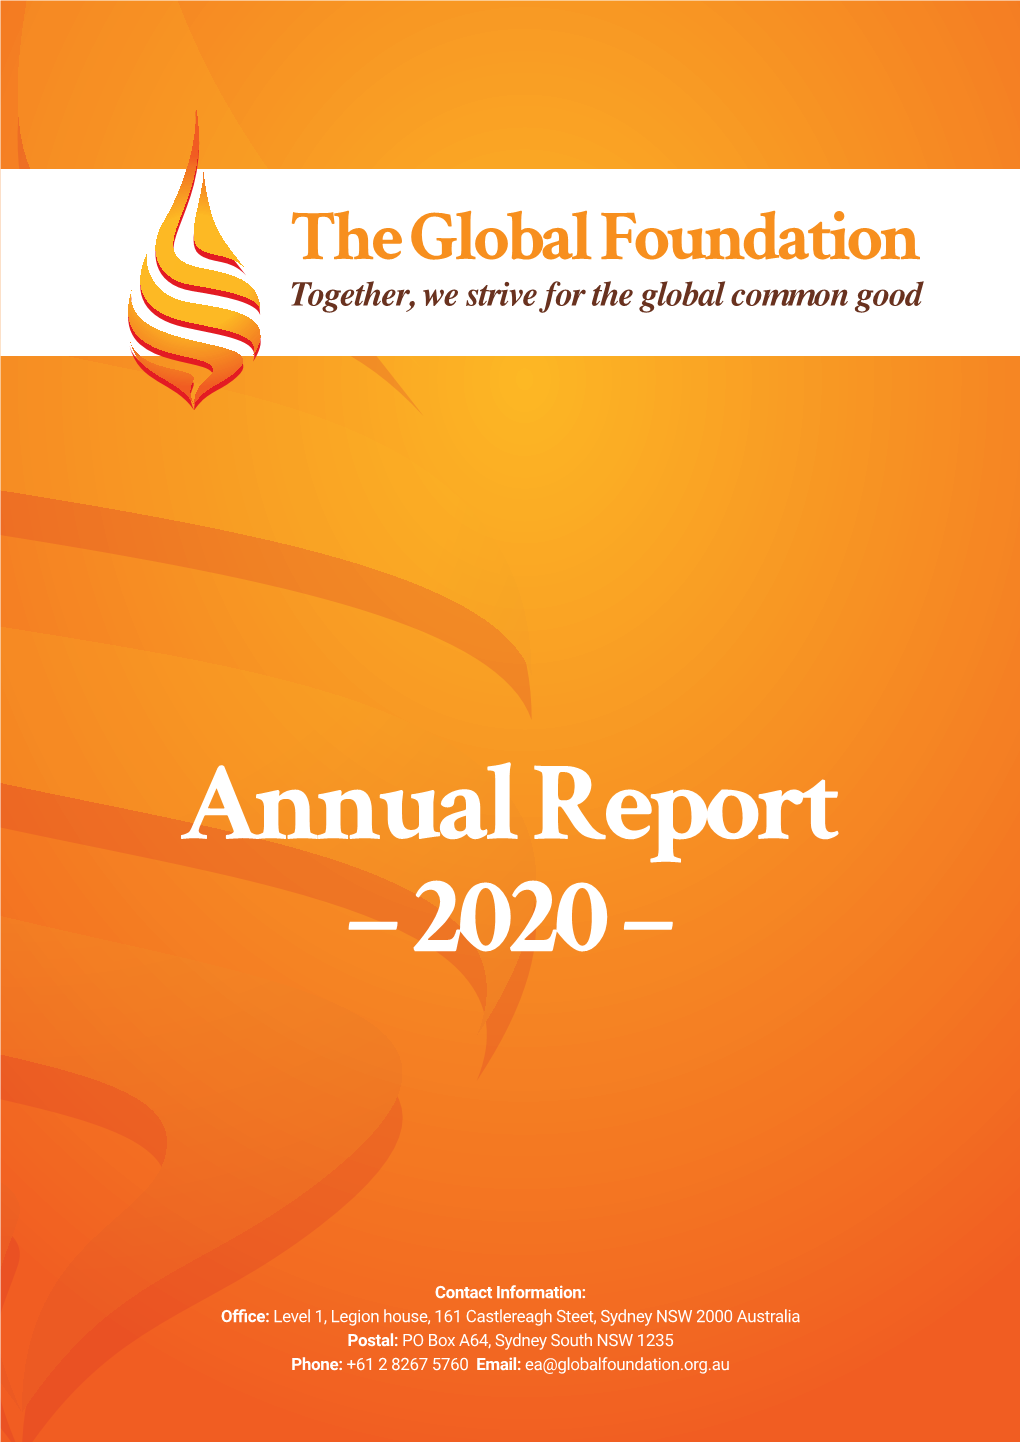 The Global Foundation 2020 Annual Report